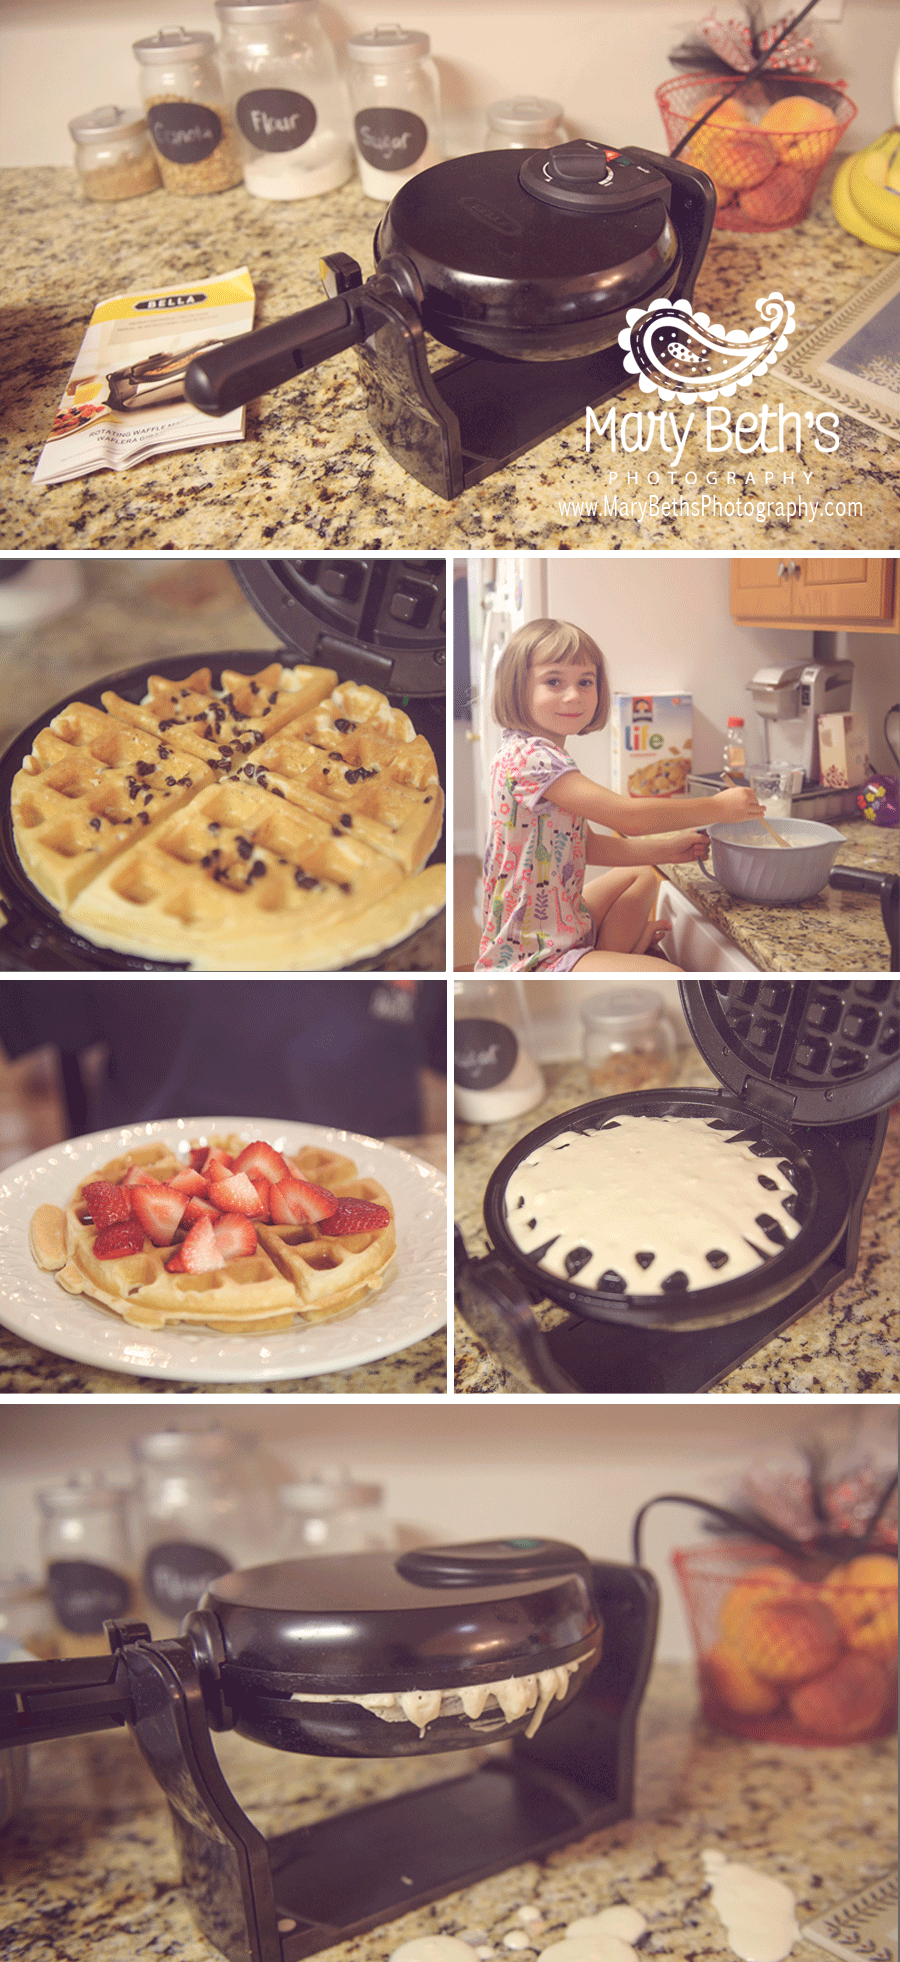 Six images of a waffle maker, waffles with chocolate chips and strawberries and waffles cooking.